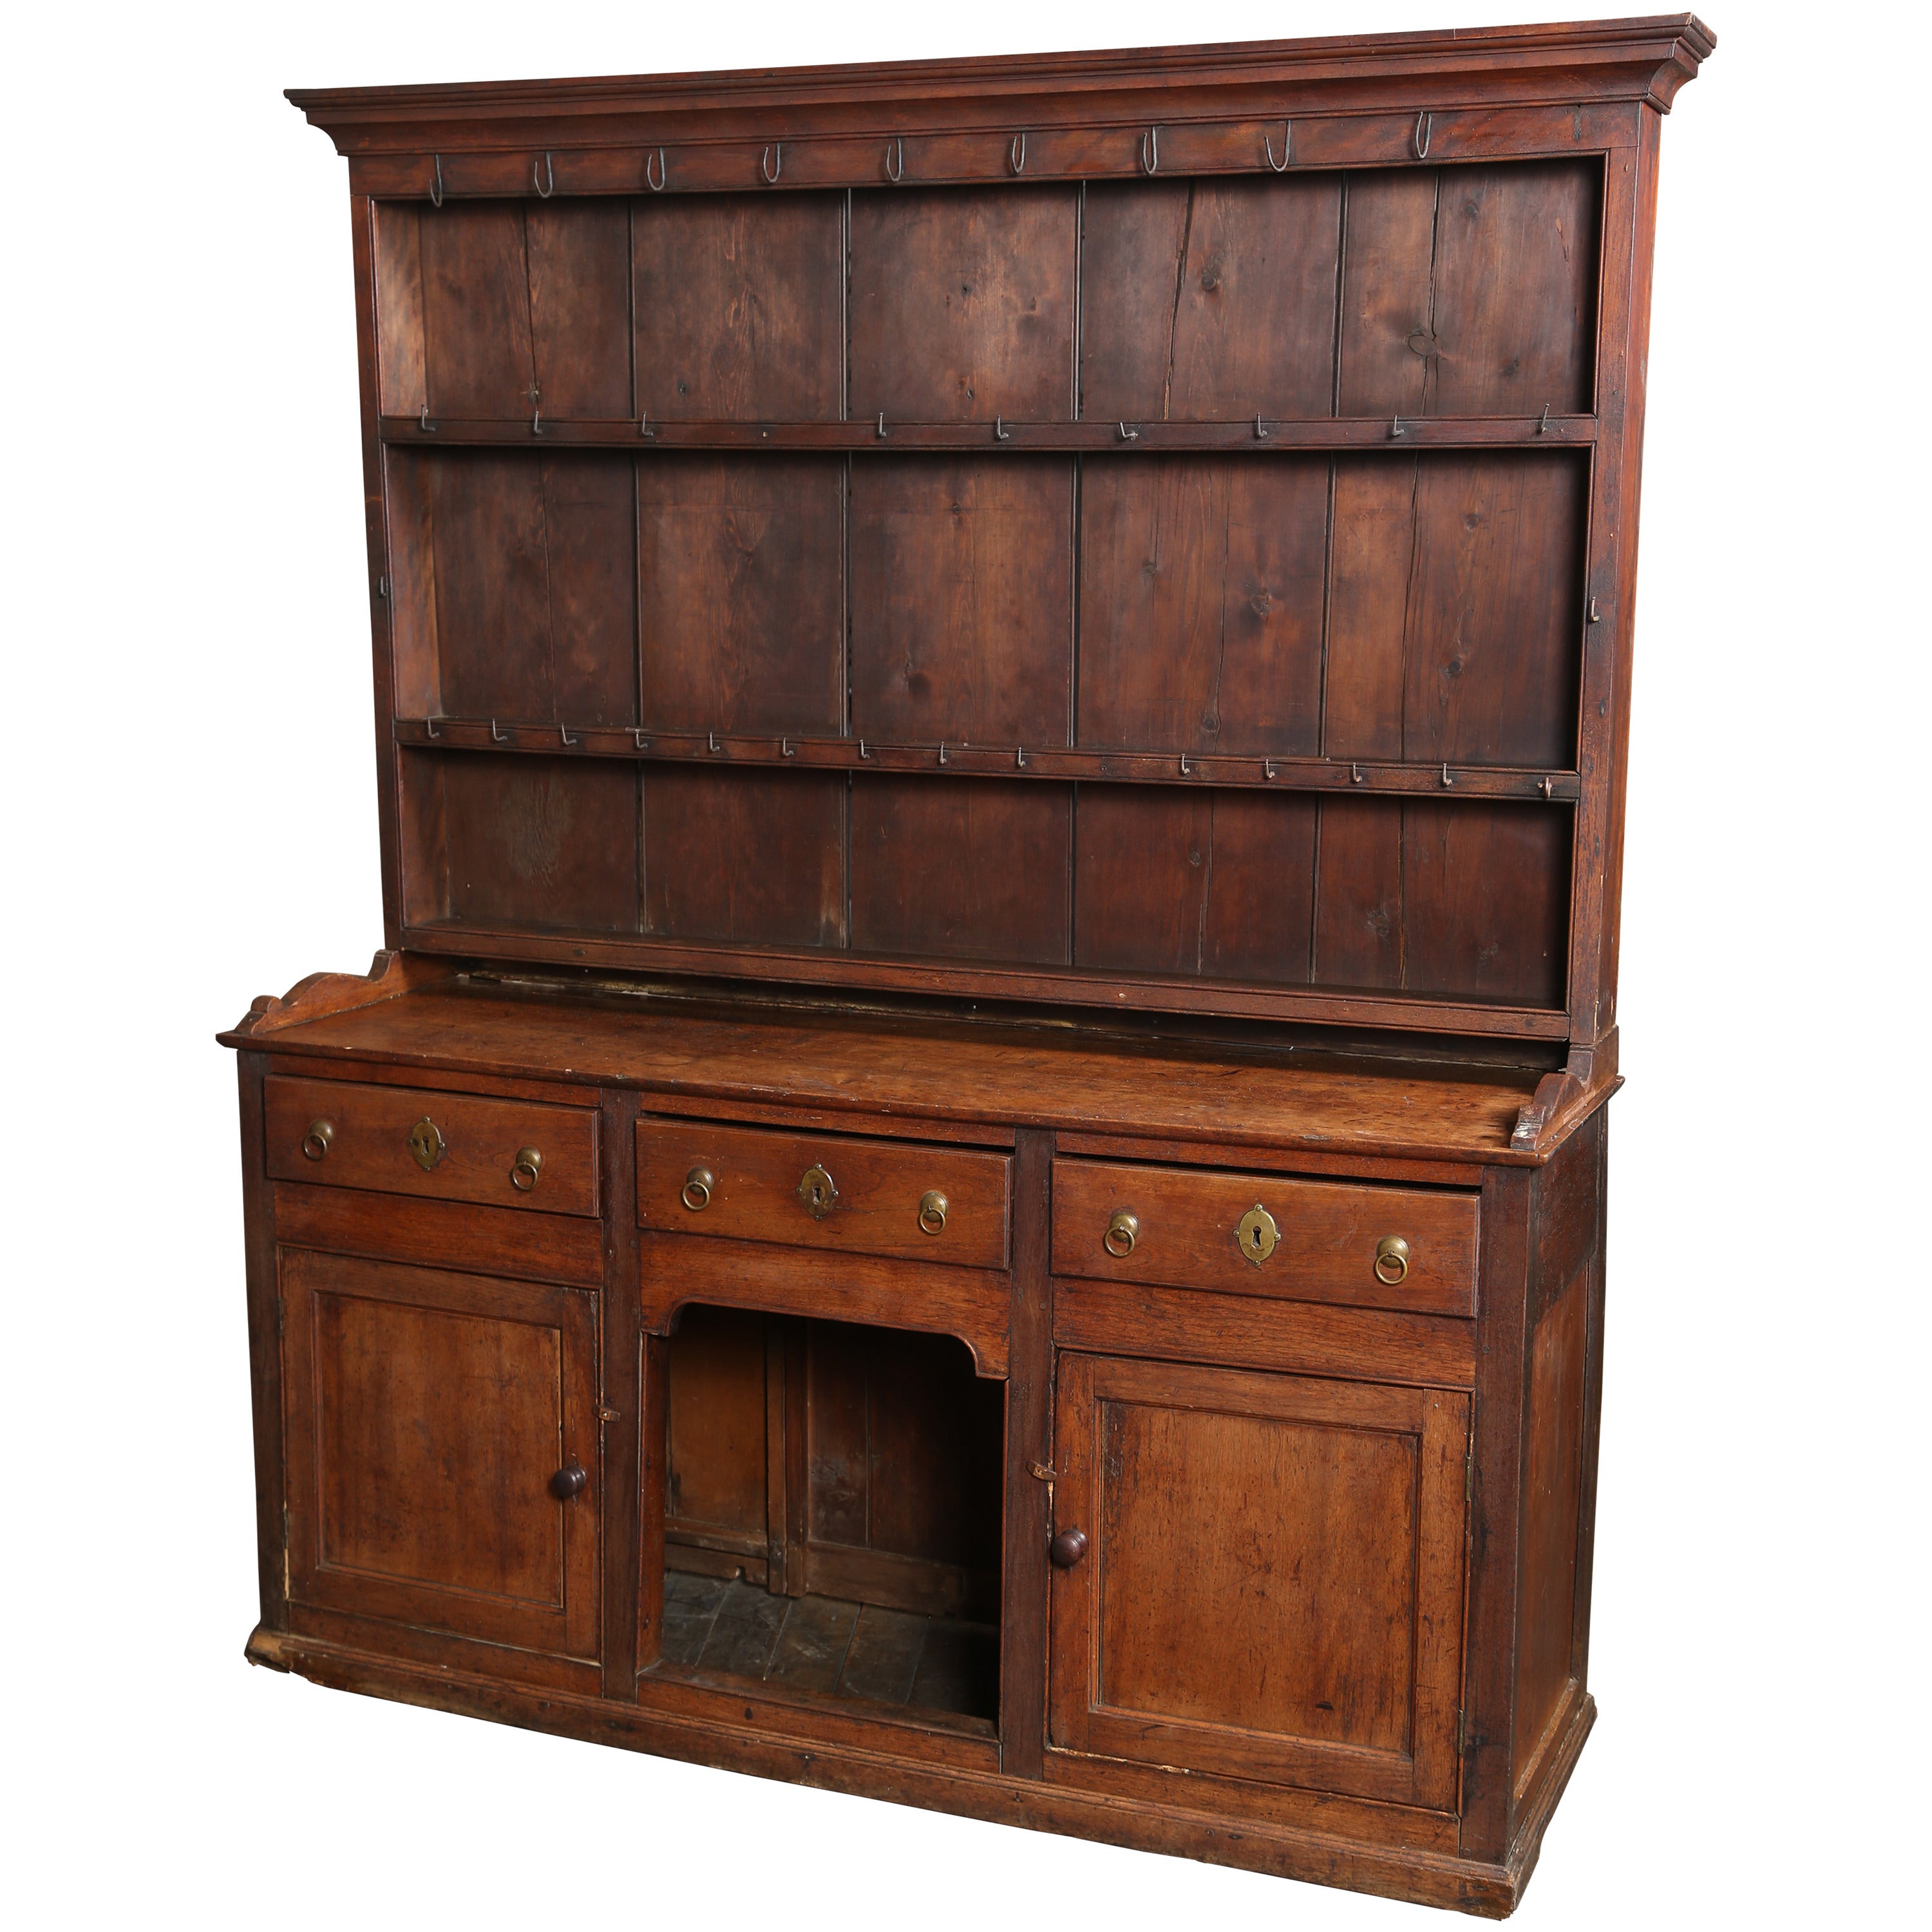 19th Century Country Wooden Hutch Storage Cabinet Cupboard